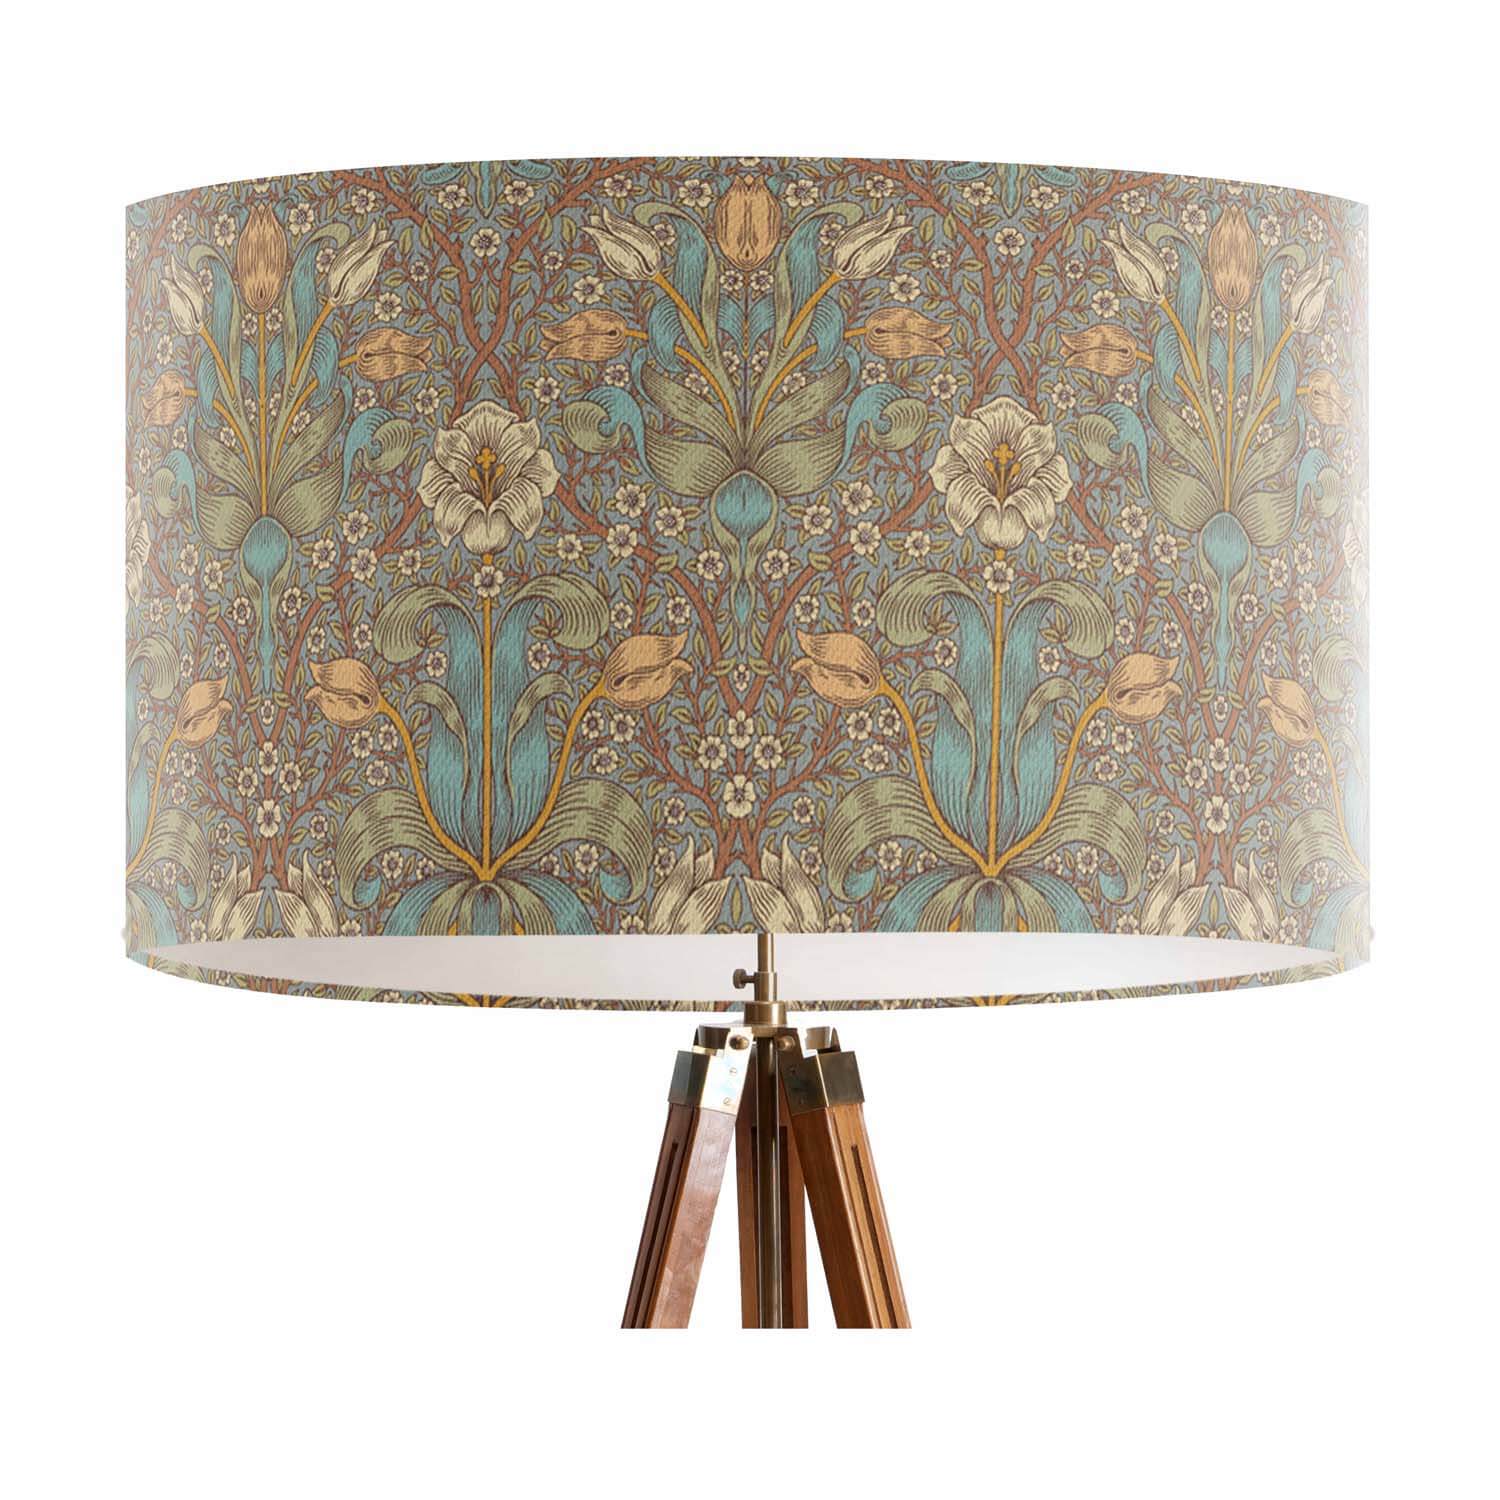 Spring Thicket - William Morris Gallery Lampshade